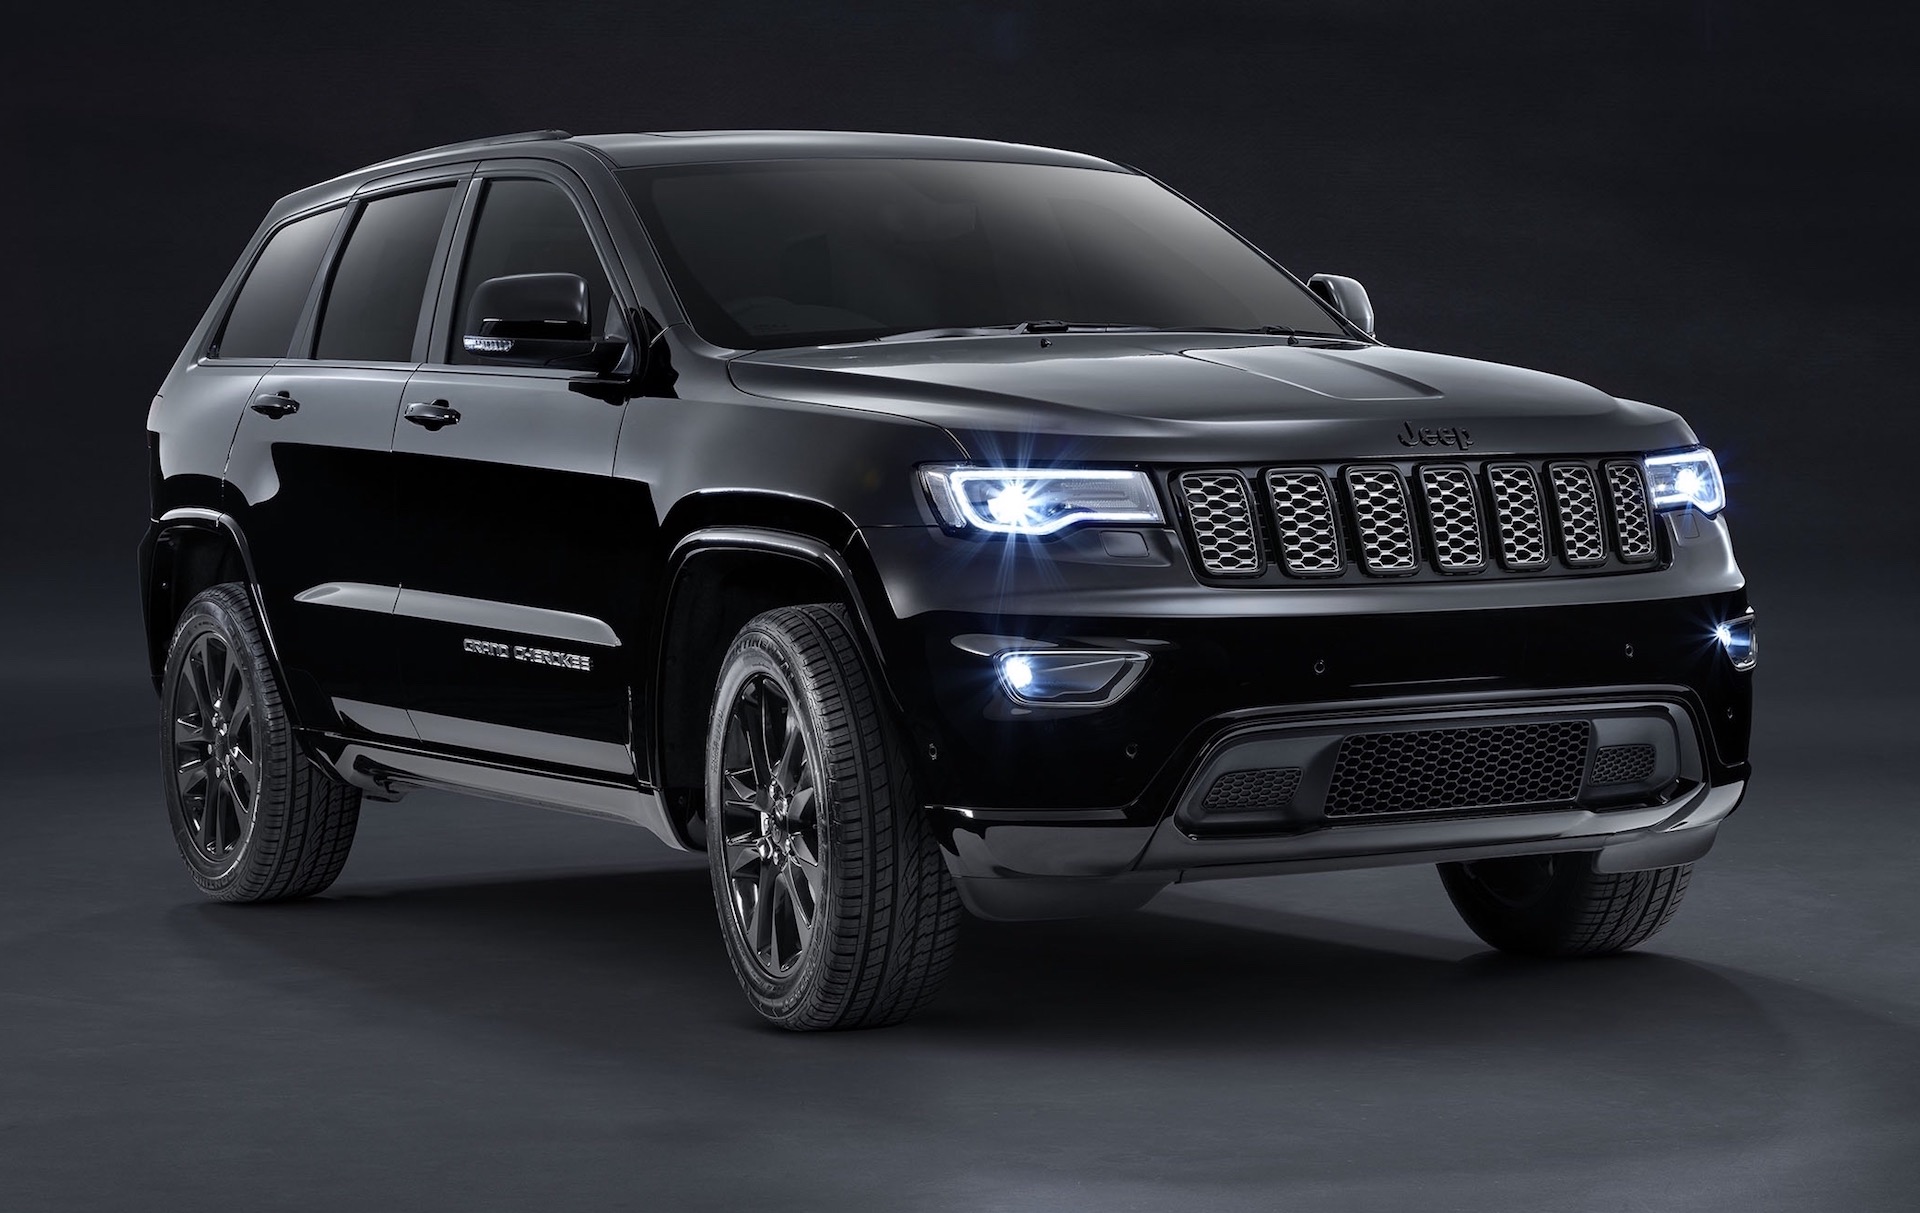 update uconnect for 2012 jeep grand cherokee